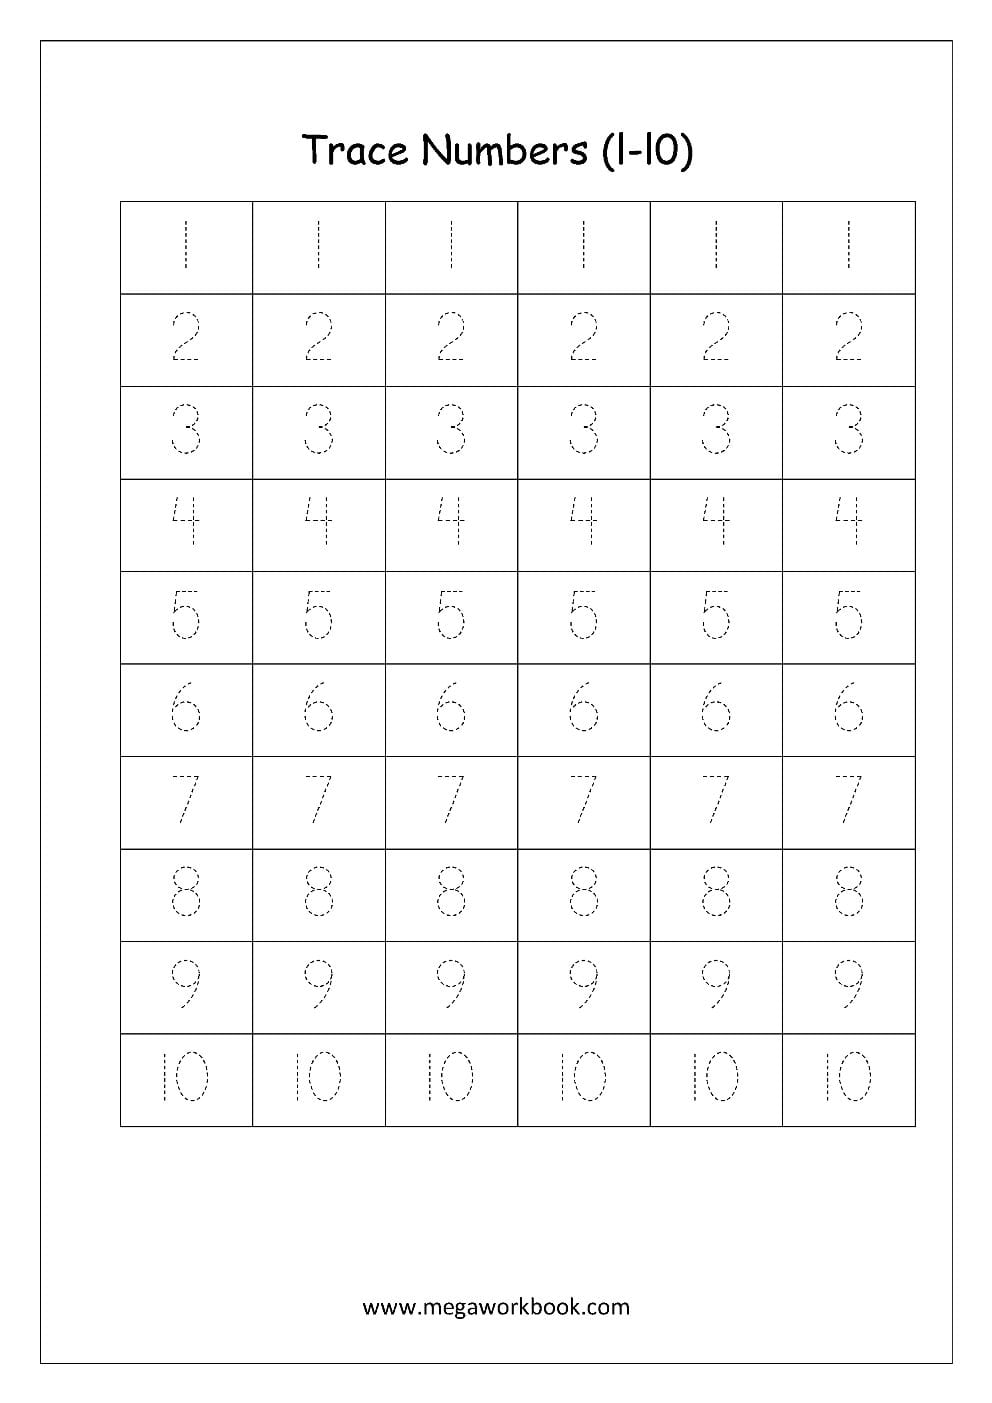 Free Printable Number Tracing And Writing 110 Worksheets As Well As Number Tracing Worksheets 1 10